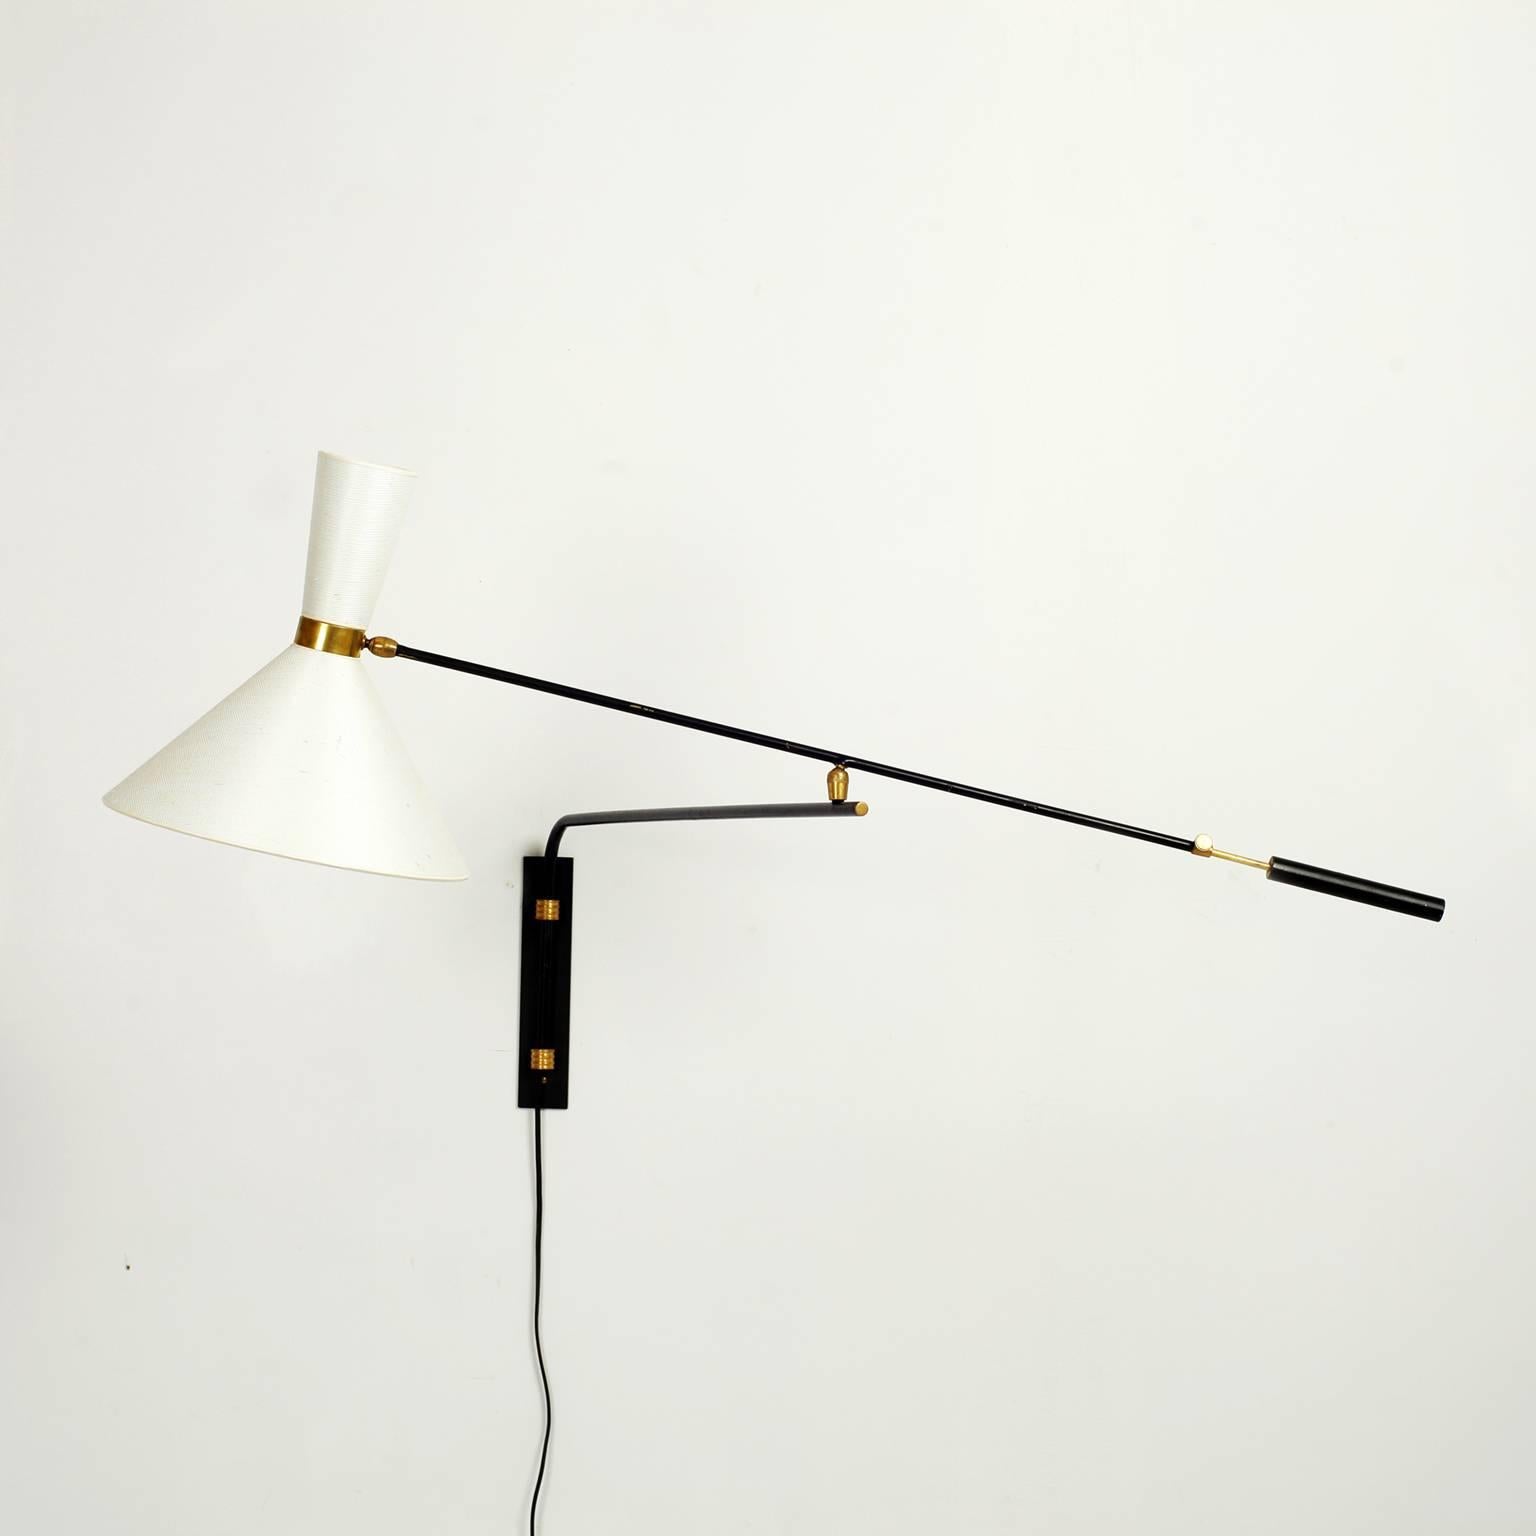 Big French two-light sources wall lamp from the 1950s with swing arm and counter balance, black steel and brass detail, new handmade lampshades in Japanese paper.
The lamp uses two French bayonet bulb (B22).
Measures: Total length 130 cm
Shade: